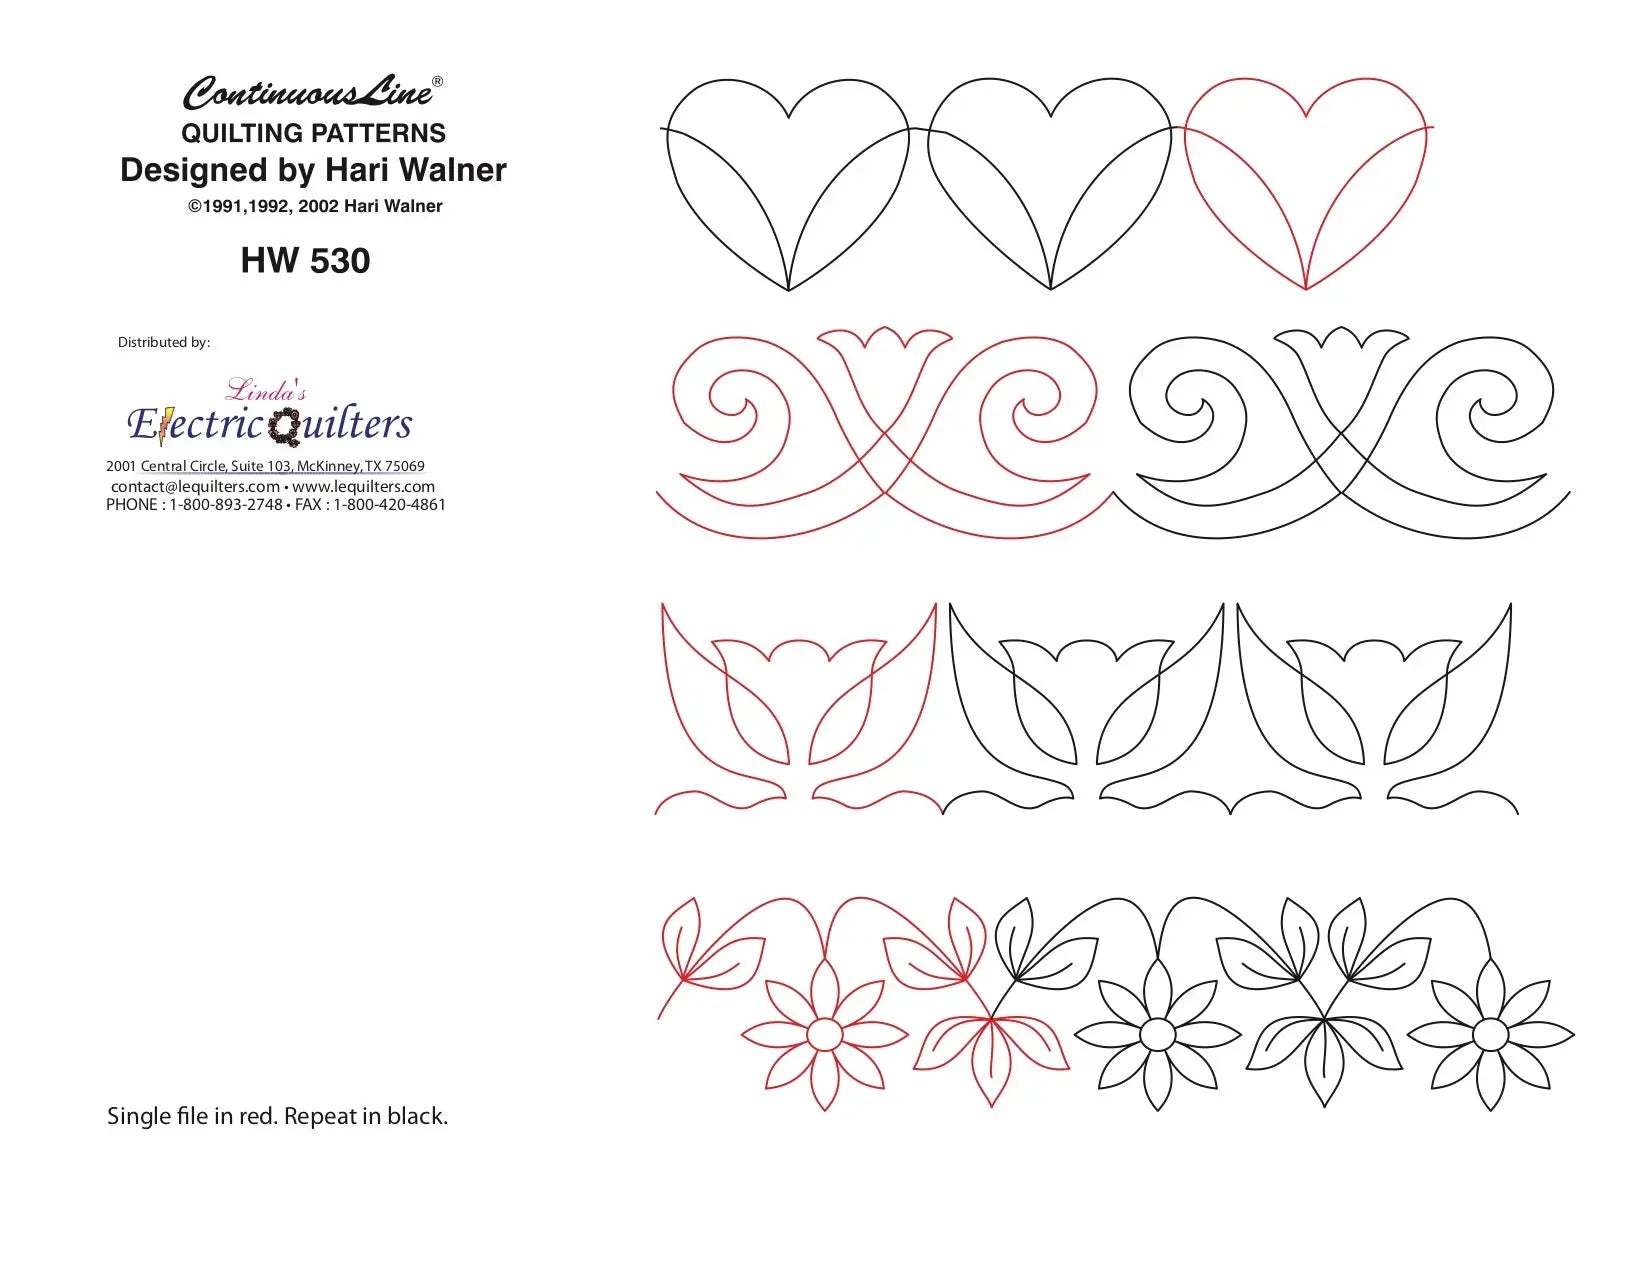 530 Hearts & Flowers Pantograph by Hari Walner - Linda's Electric Quilters